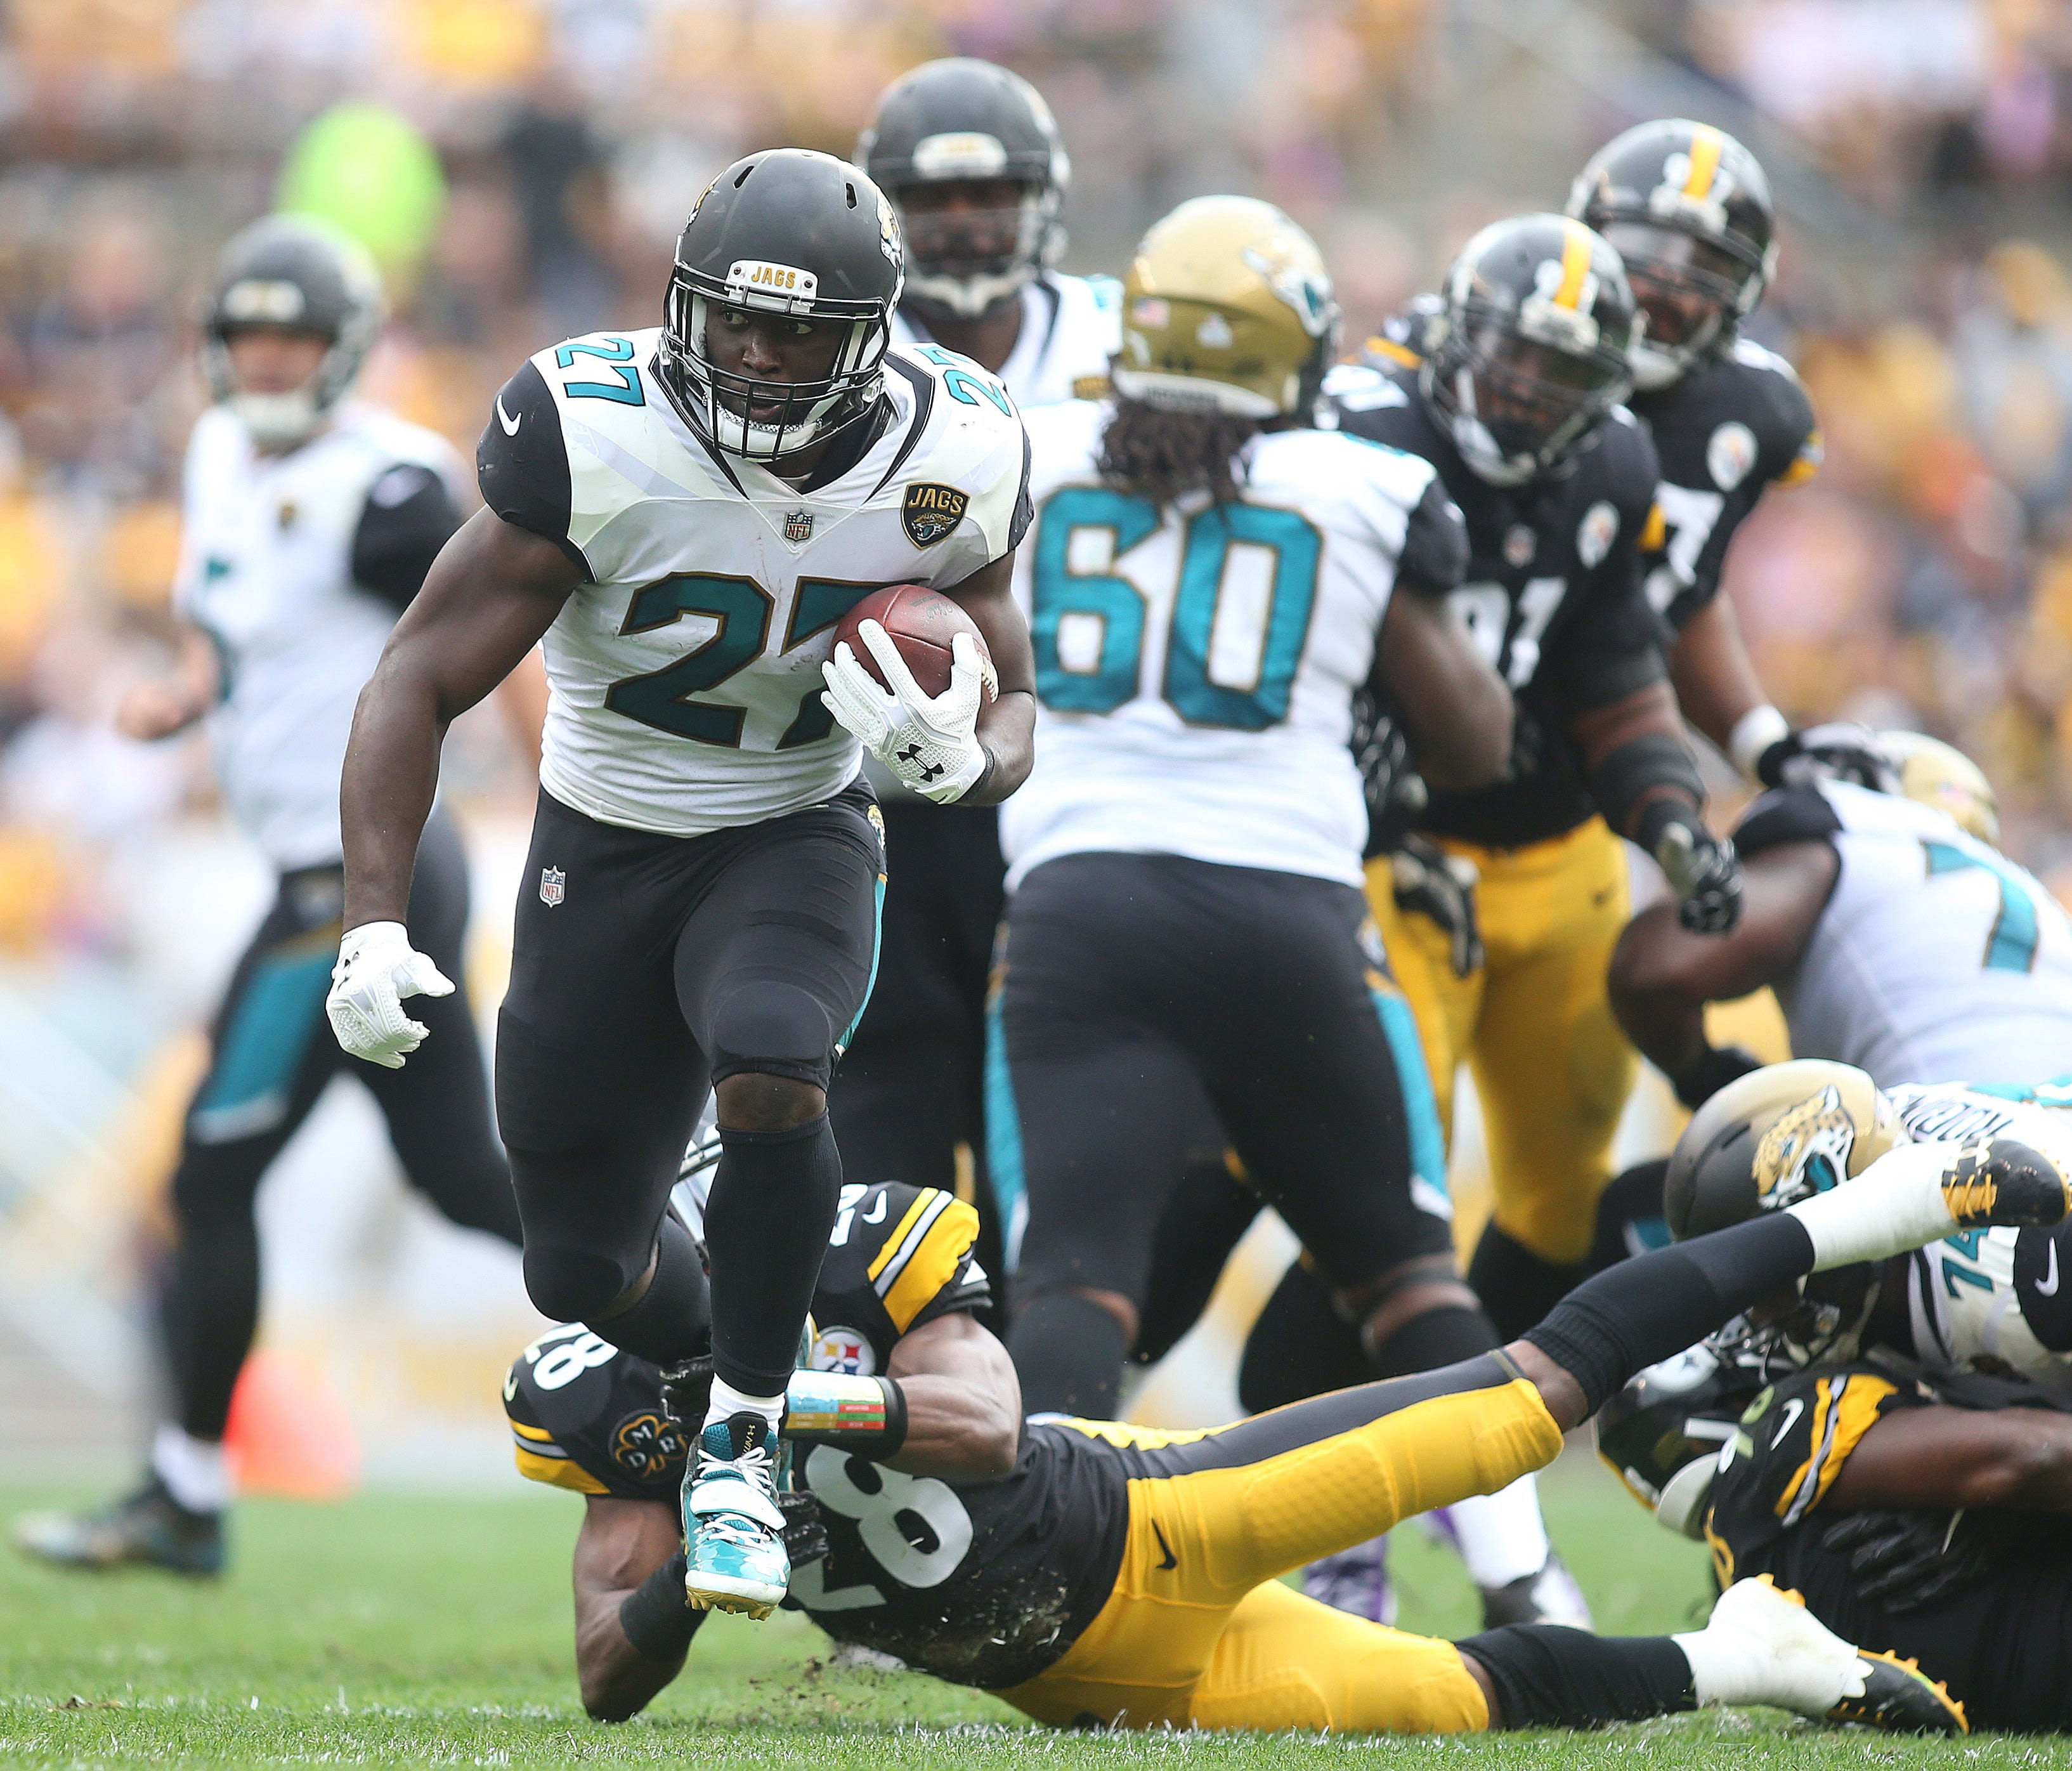 Jacksonville Jaguars running back Leonard Fournette (27) rushes the ball against the Pittsburgh Steelers during the first quarter at Heinz Field.